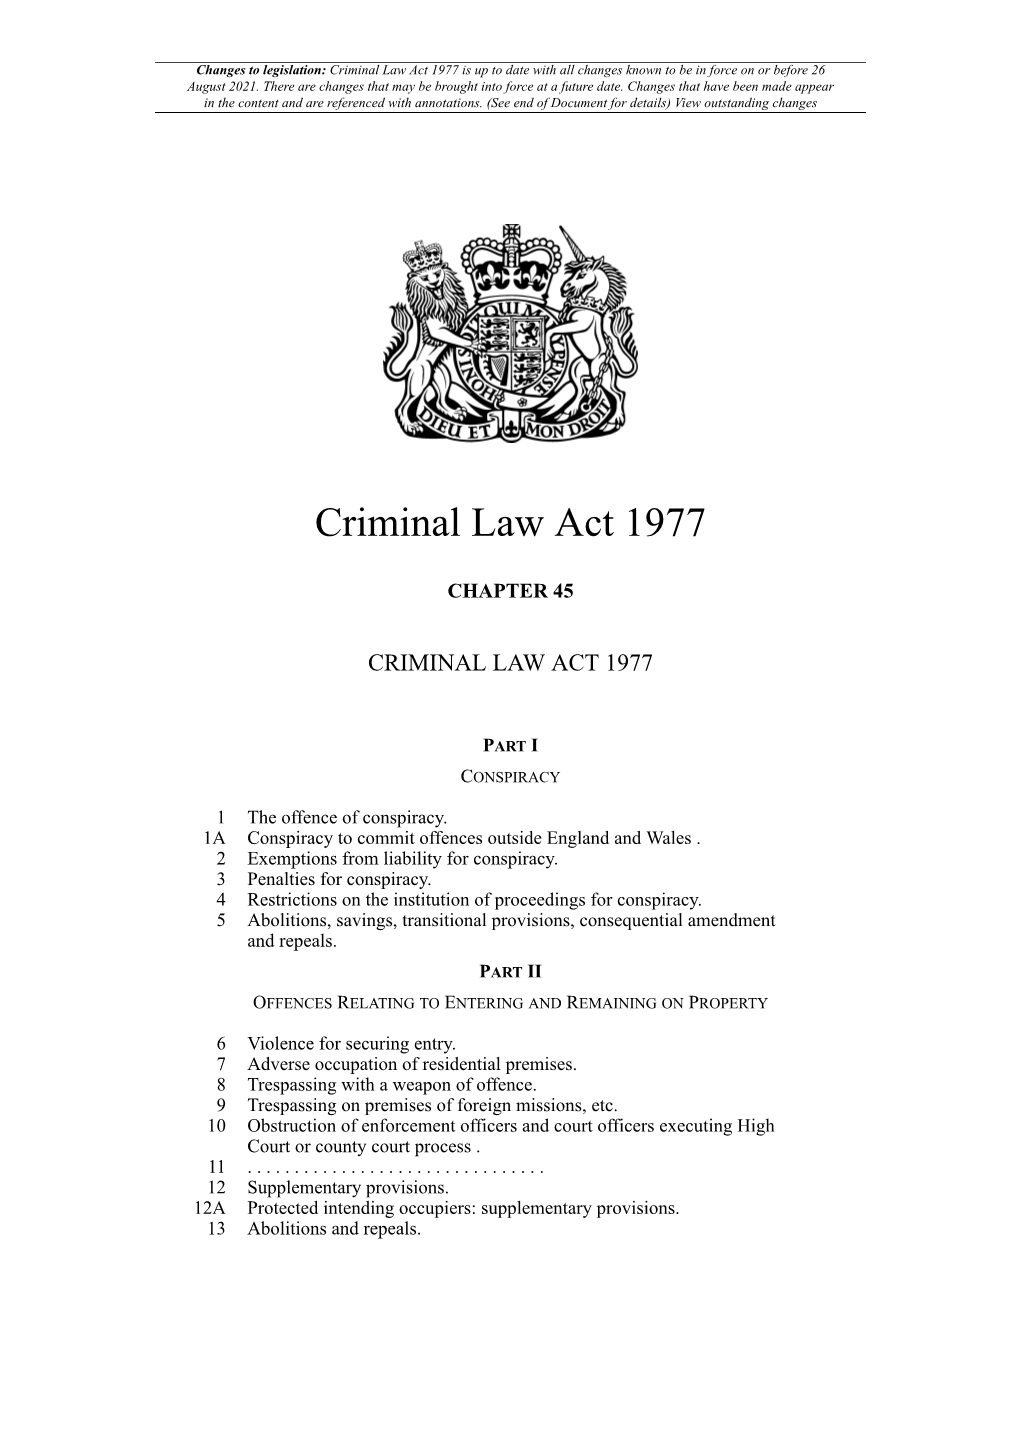 Criminal Law Act 1977 Is up to Date with All Changes Known to Be in Force on Or Before 26 August 2021